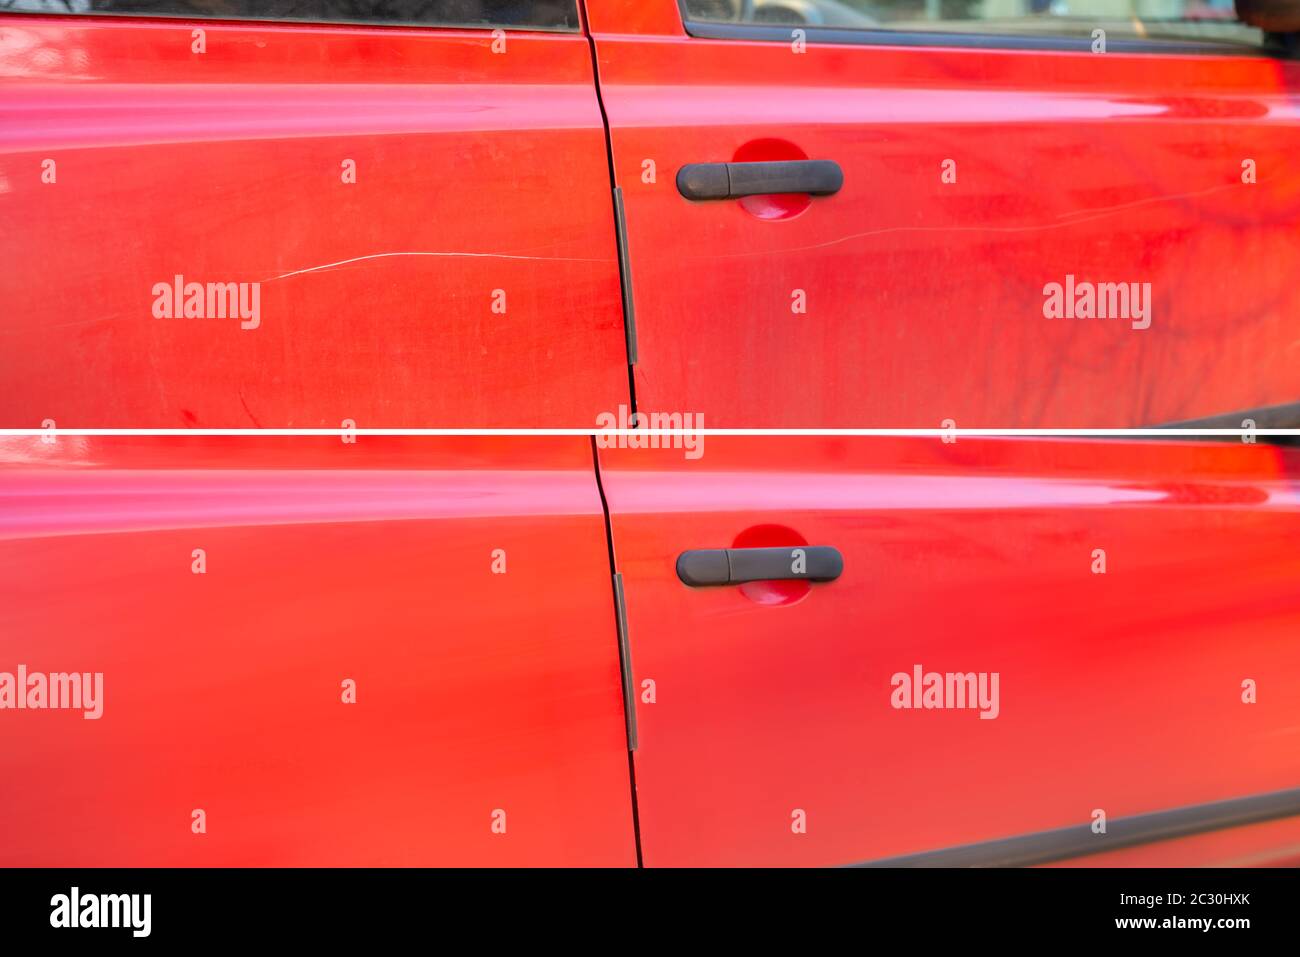 Photo Of Car Scratch Repair Before And After Stock Photo - Alamy